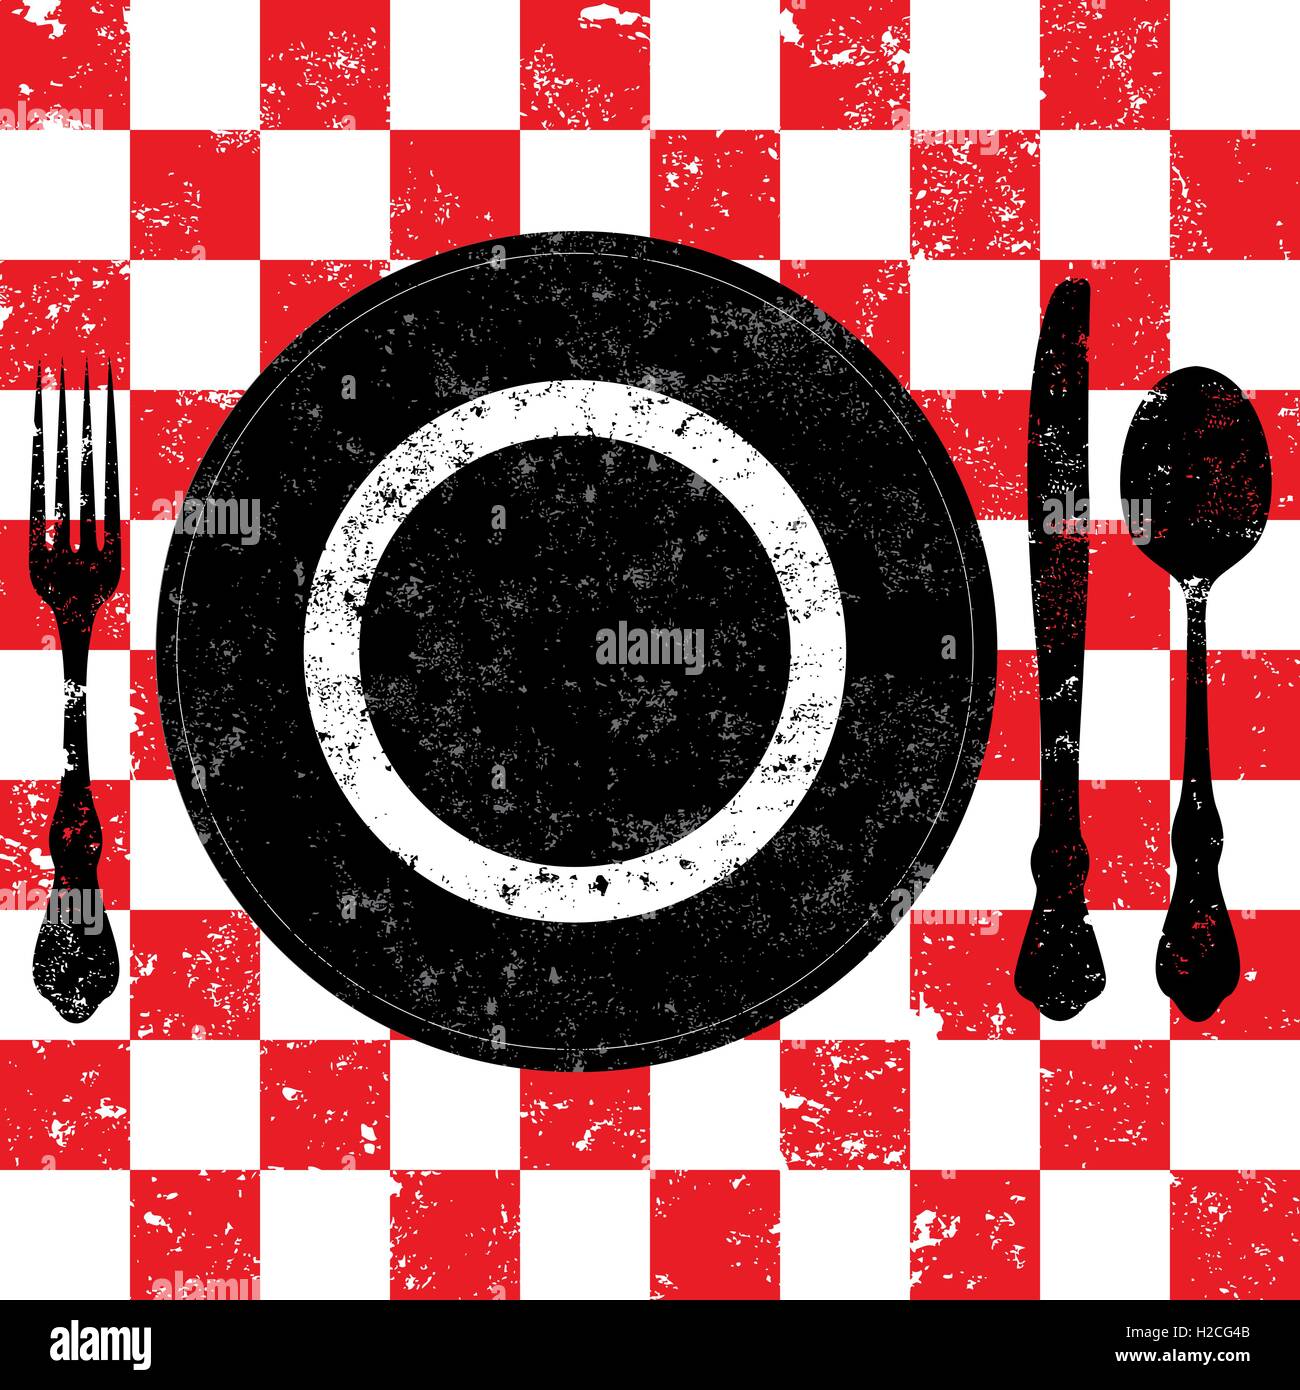 Picnic place setting Silverware and plate over a red checkerboard tablecloth background. Stock Vector